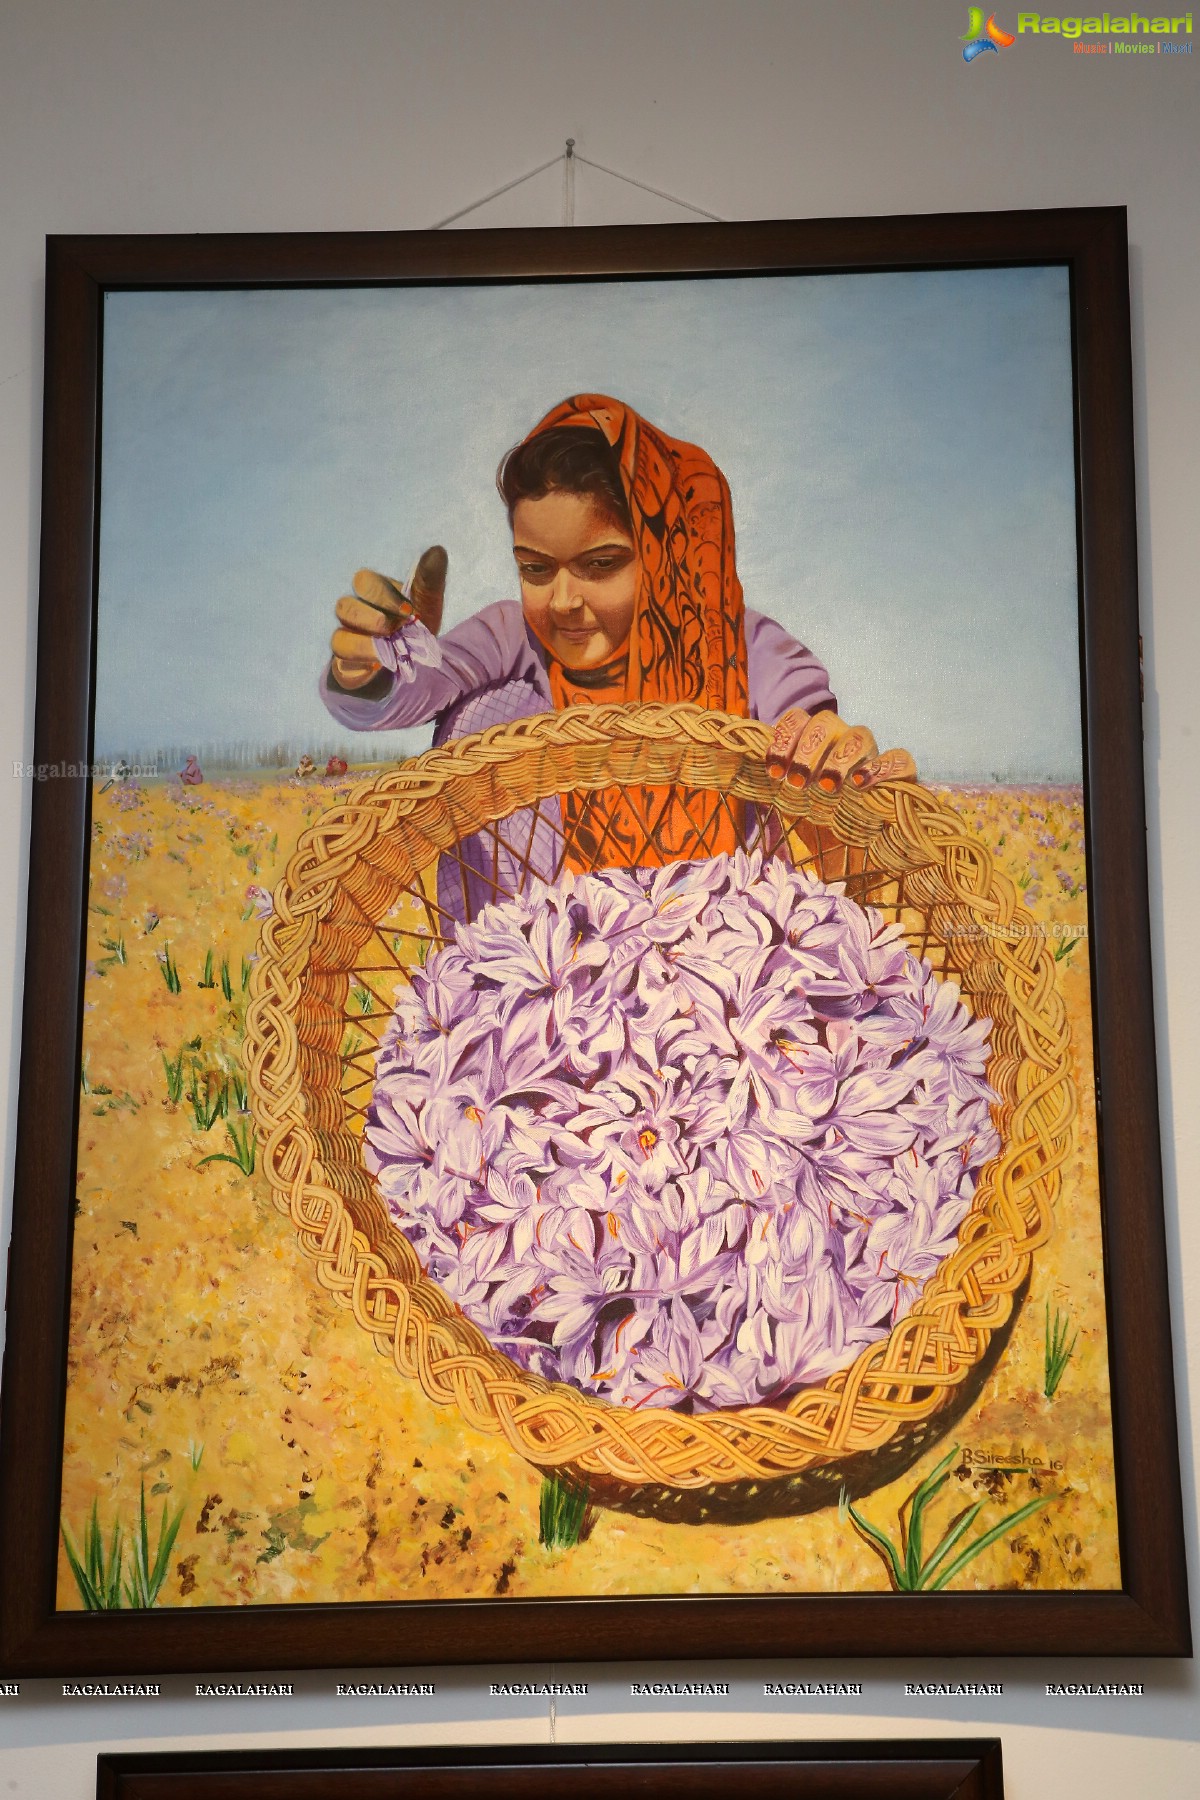 Reminiscences - Kashmir on Canvas Art Exhibition for a Cause at State Art Gallery